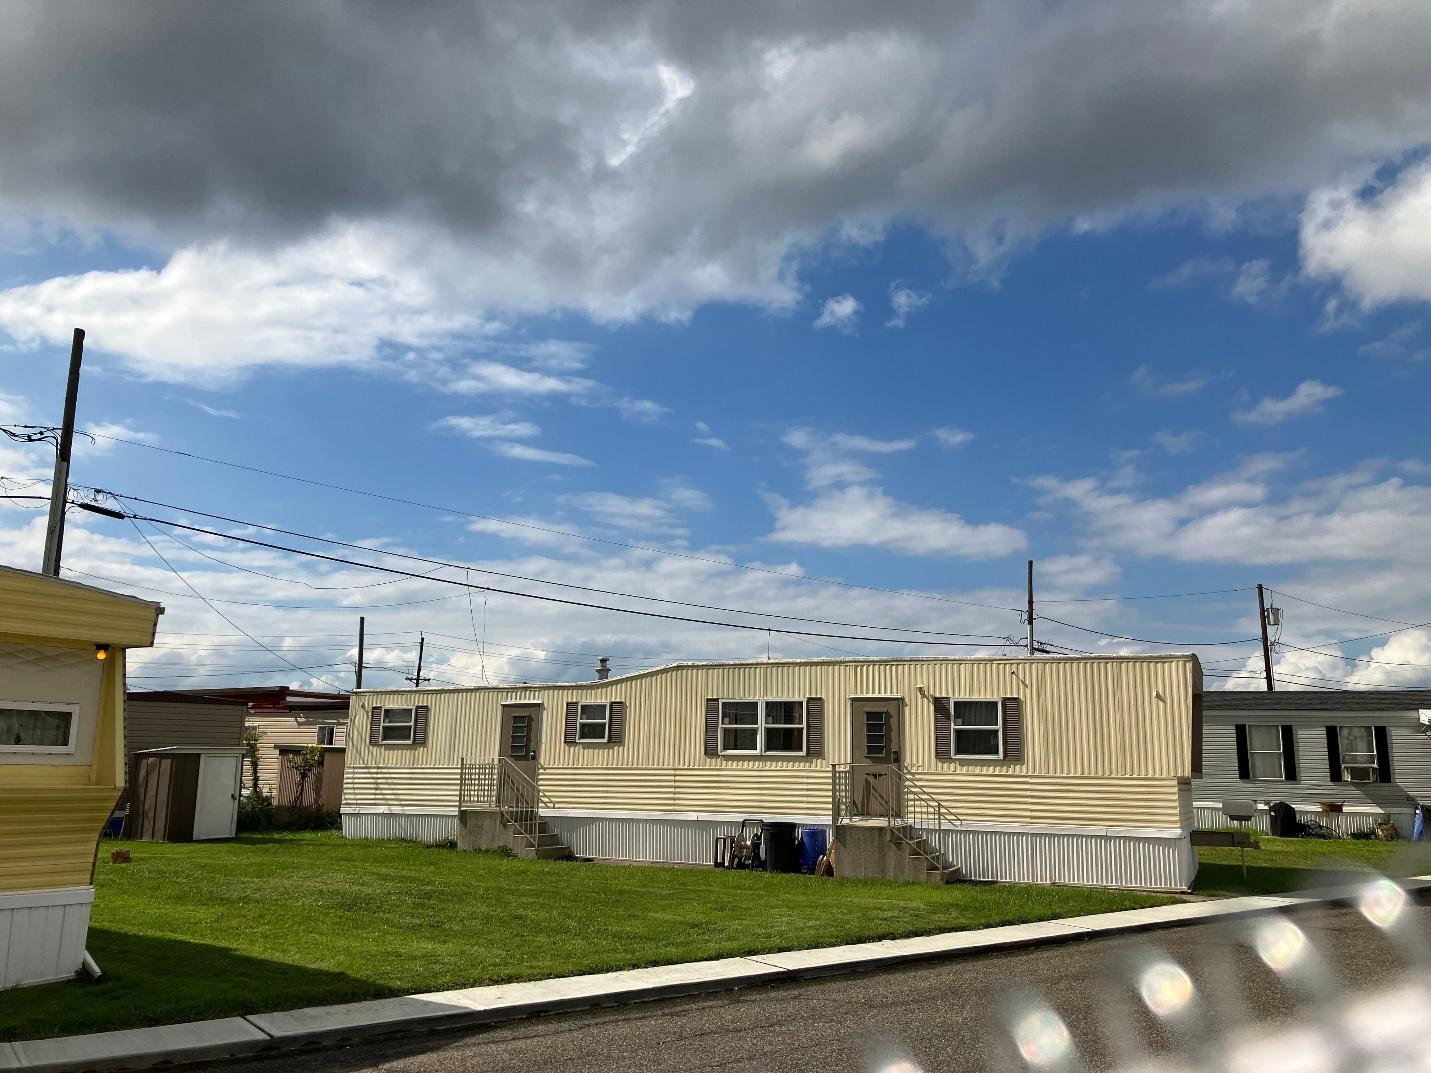 A mobile home with a lawn and power lines

Description automatically generated